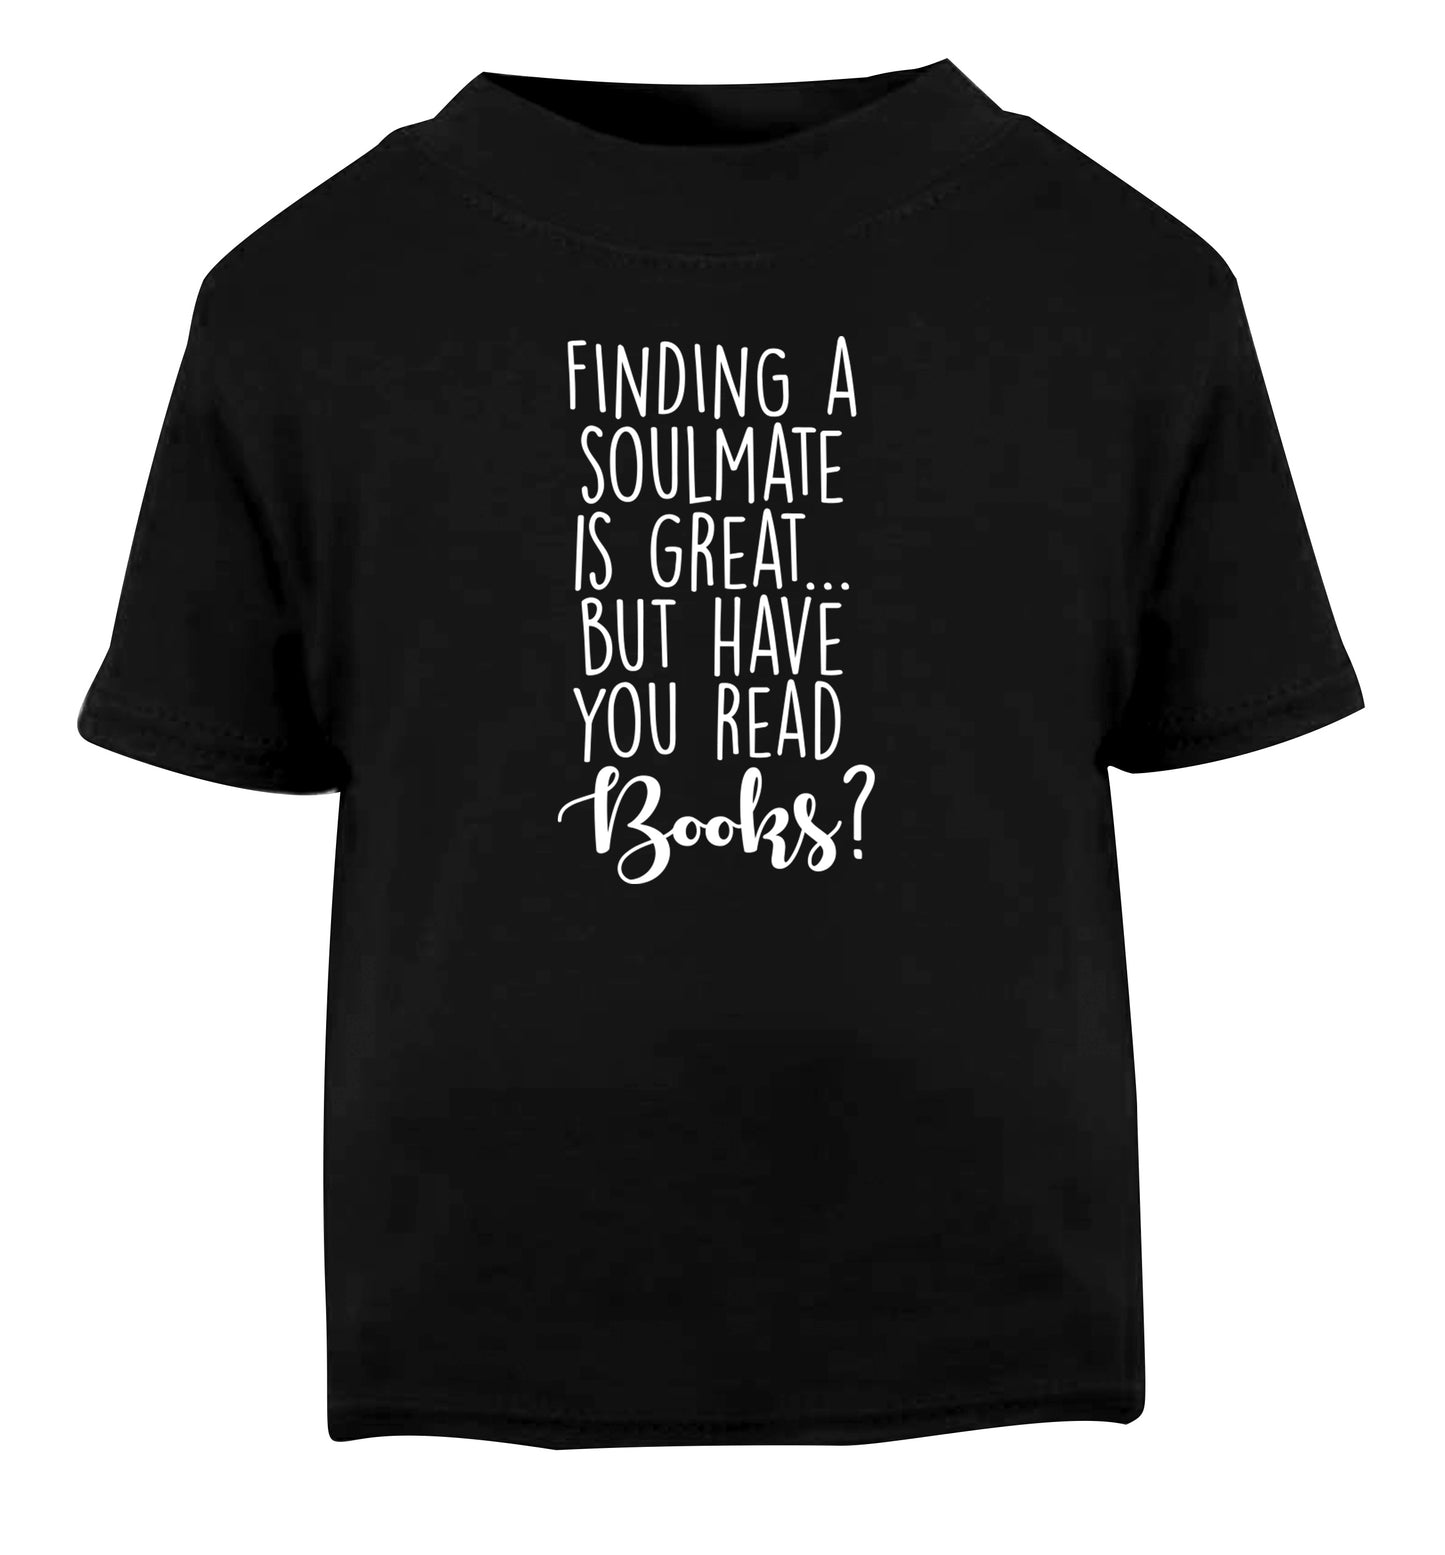 Finding a soulmate is great but have you read books? Black Baby Toddler Tshirt 2 years